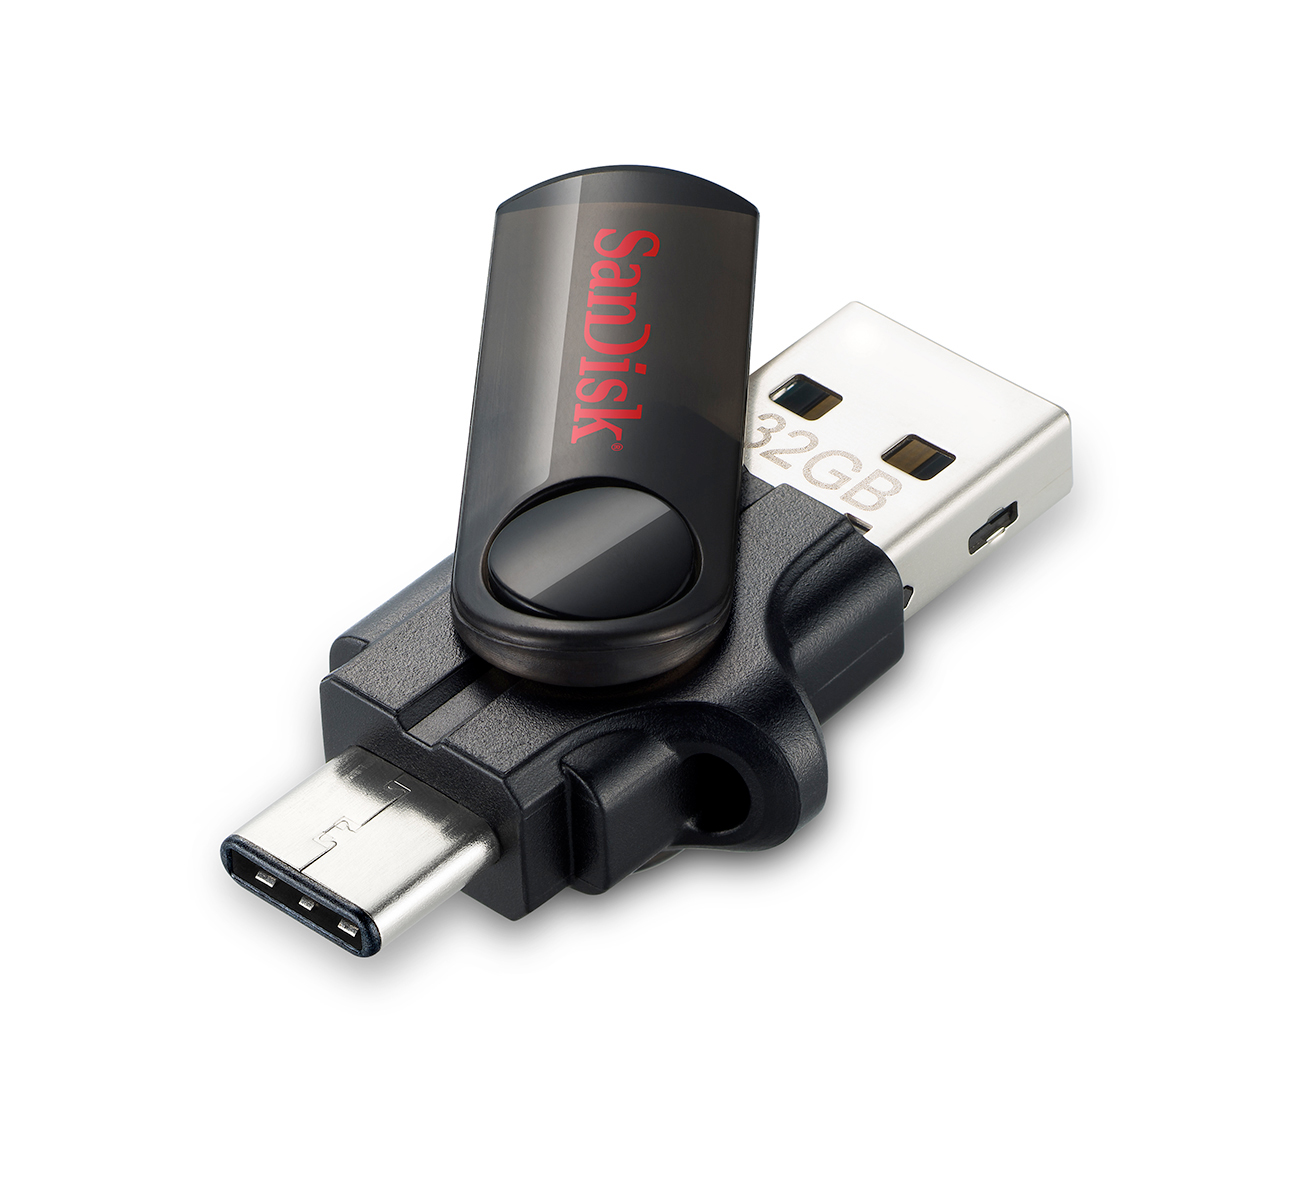 SanDisk releases the first USB memory key with a Type-C connection